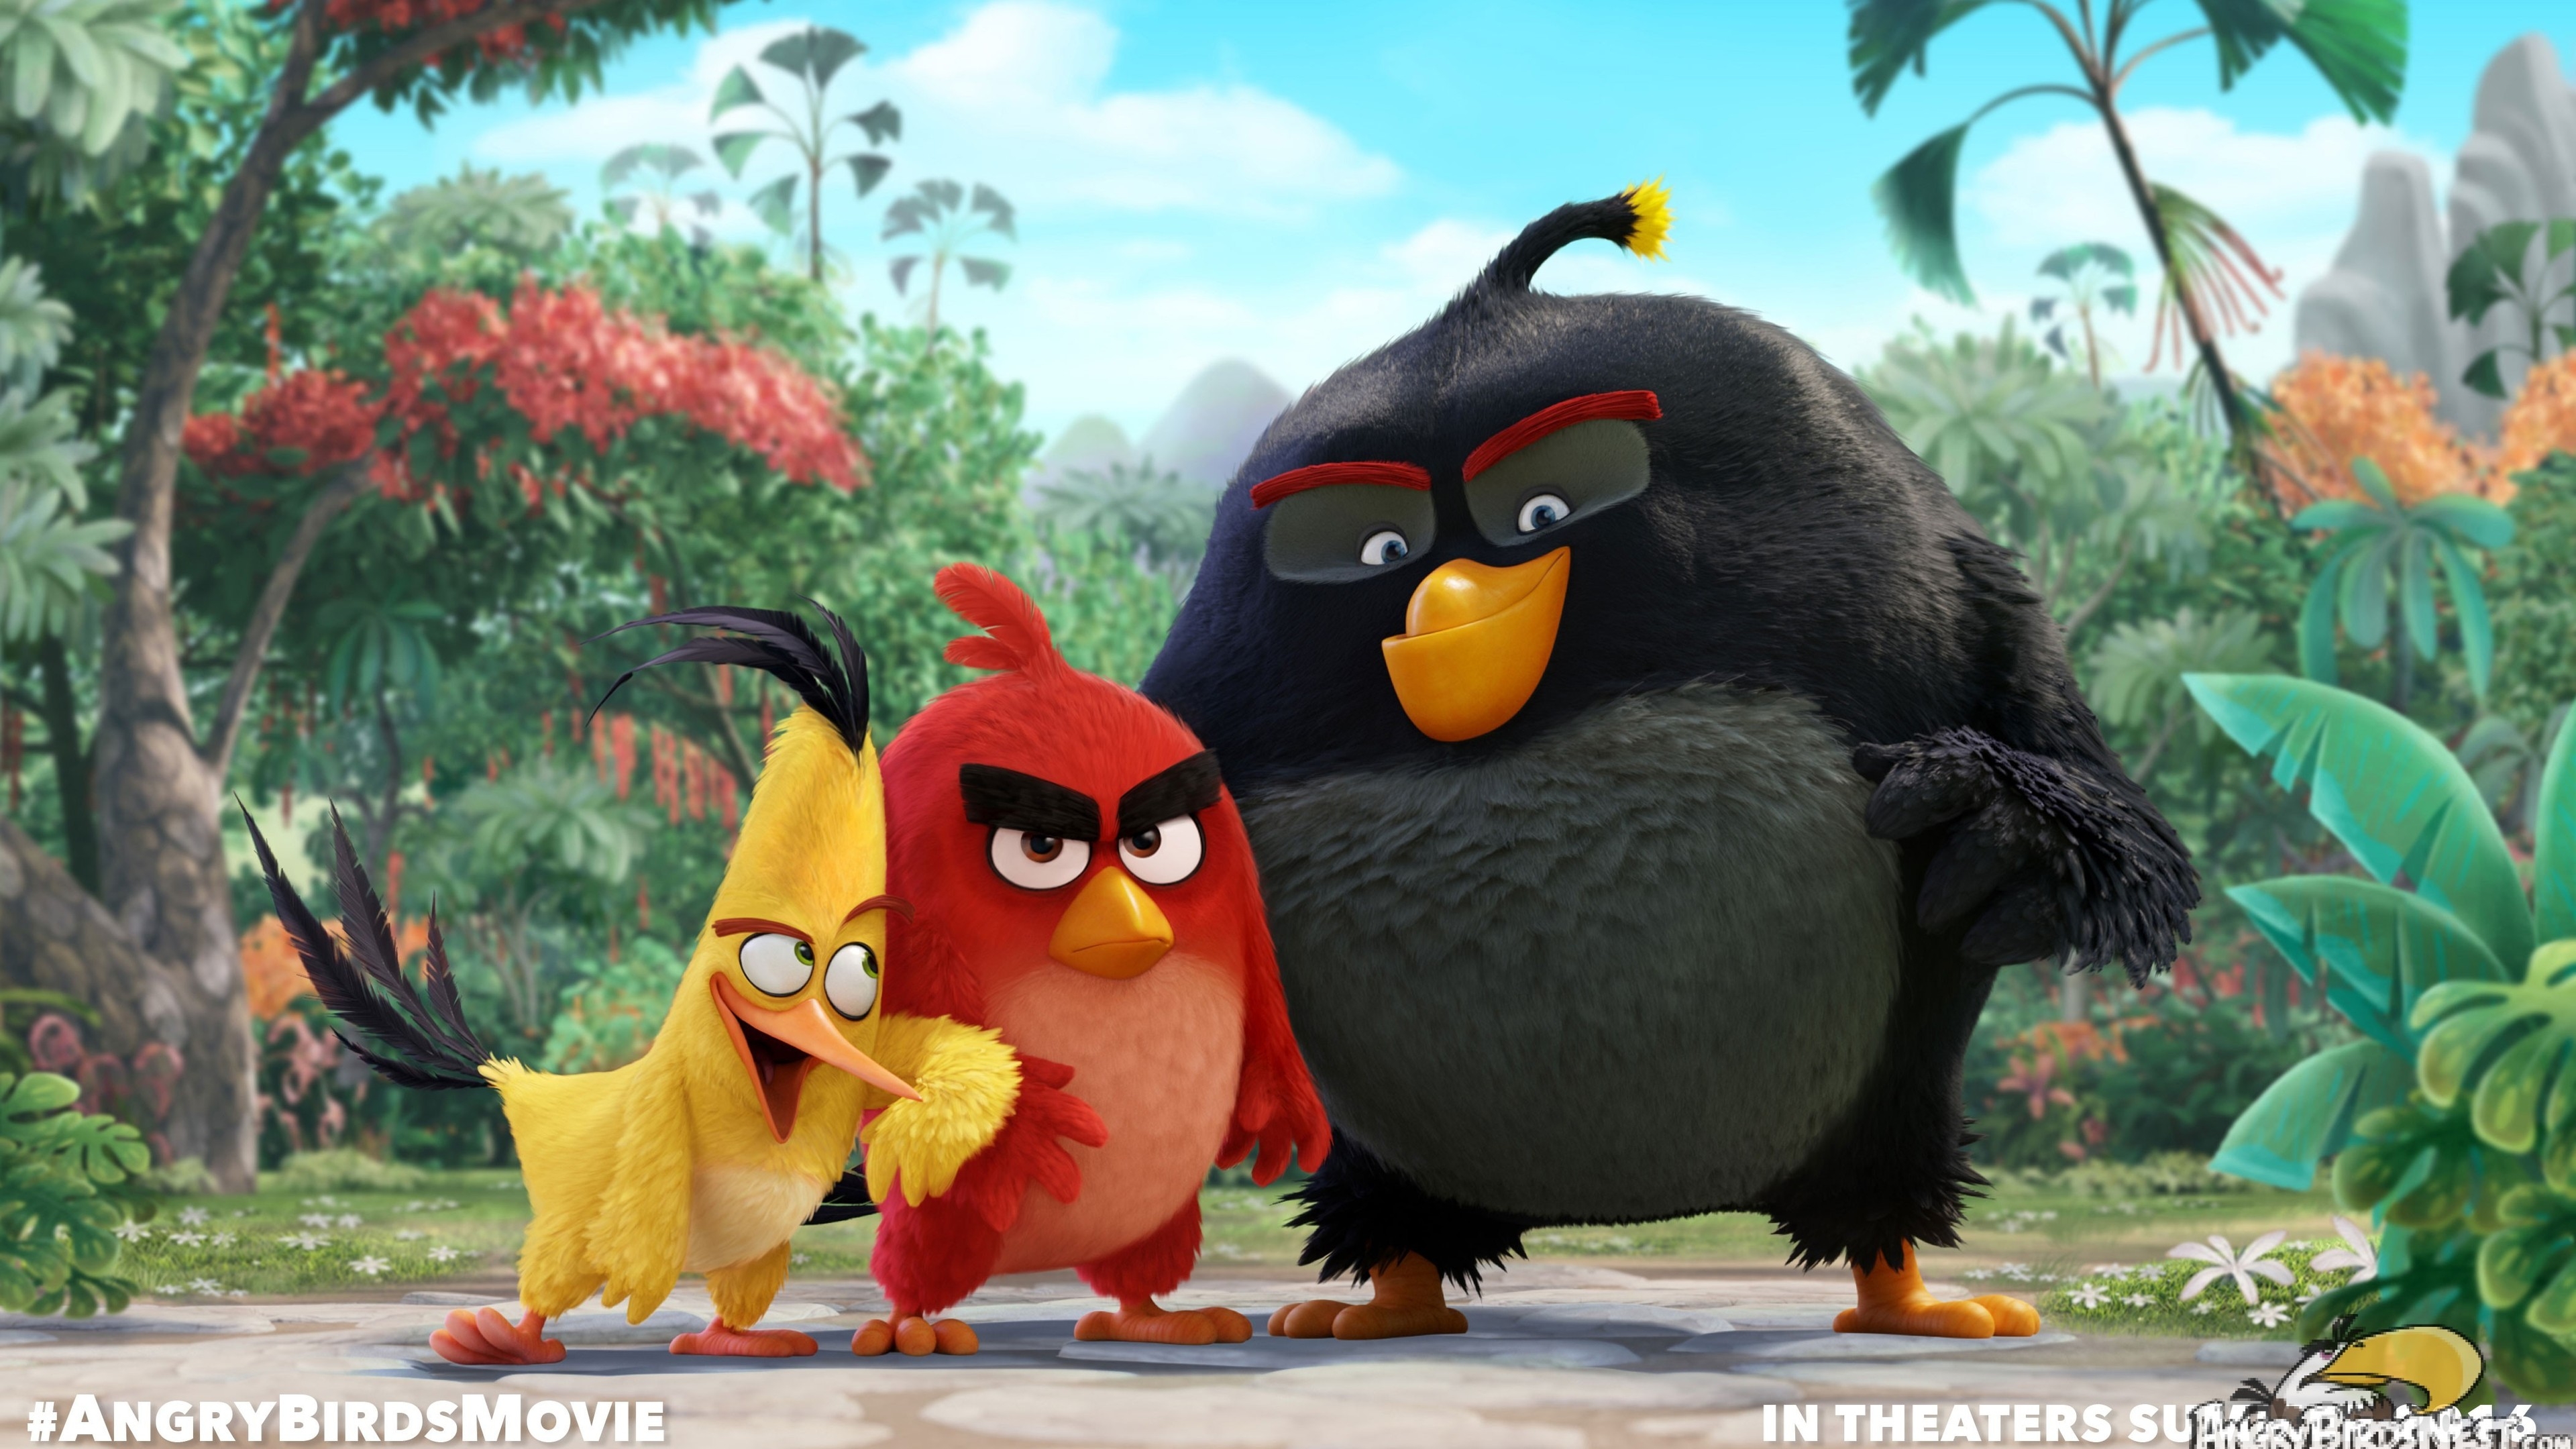 Angry Birds Movie for 3840 x 2160 Ultra HD resolution